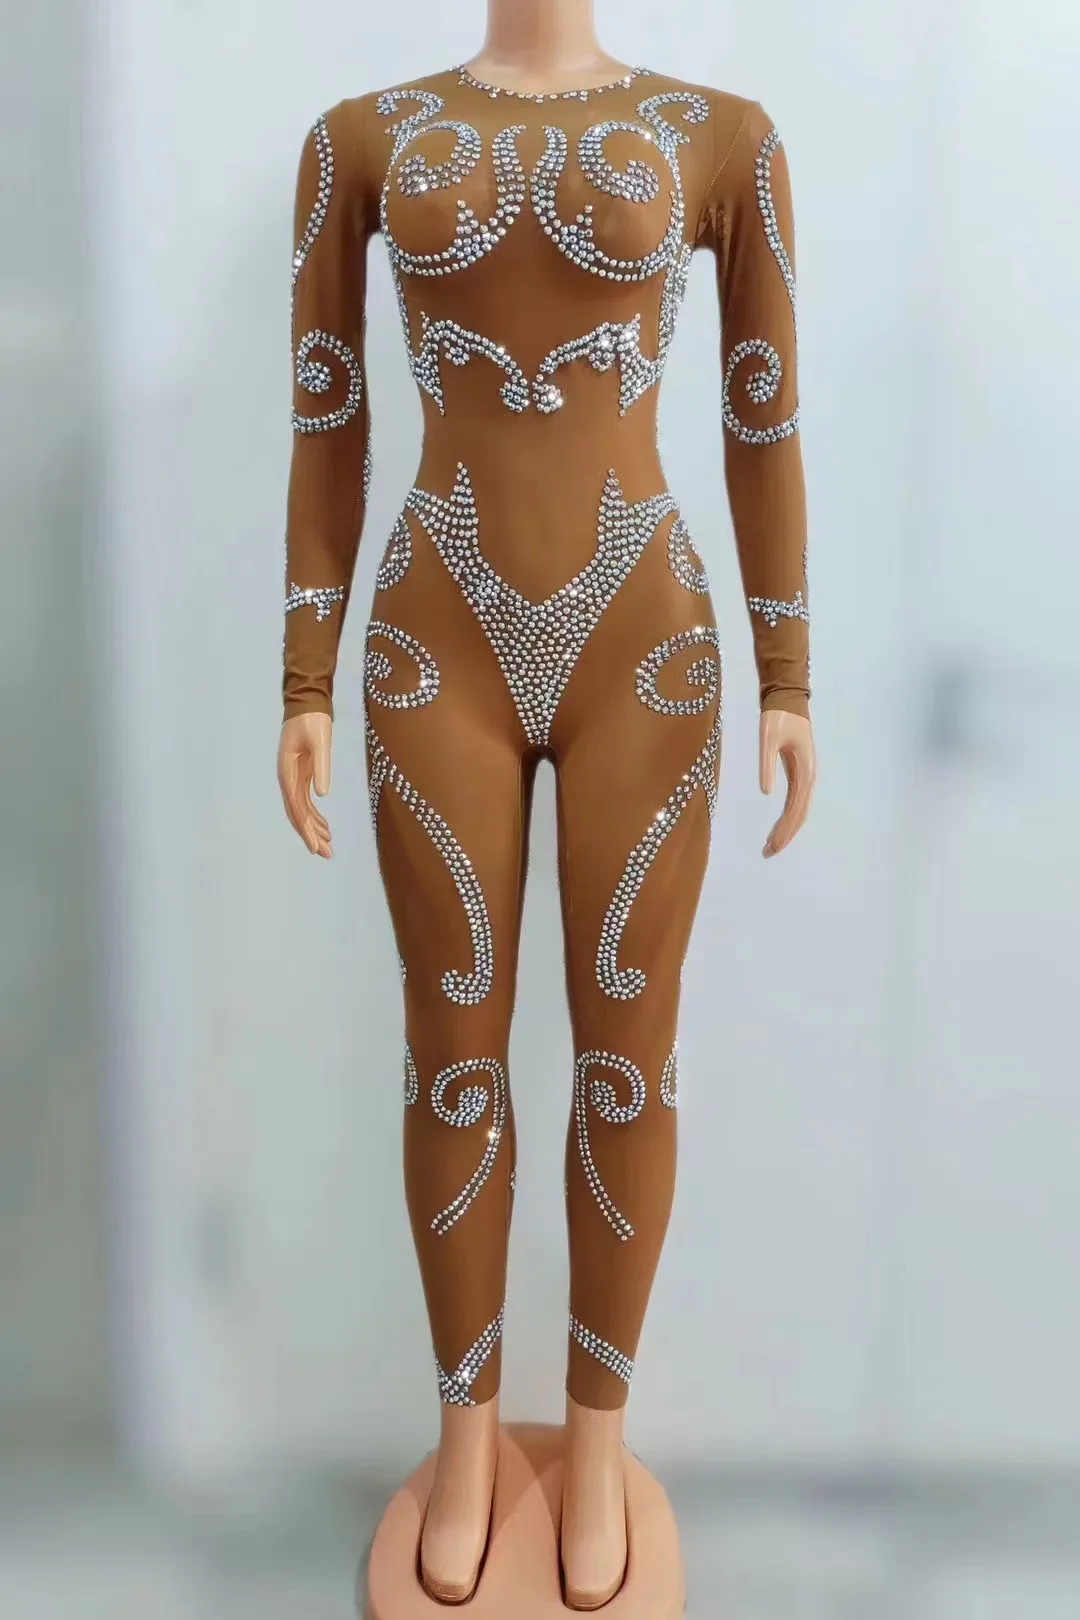 

Sexy Stage Shining AB Color Rhinestones Nude Transparent Jumpsuit Dance Bodysuit Outfit Birthday Performance Singer Club Costume